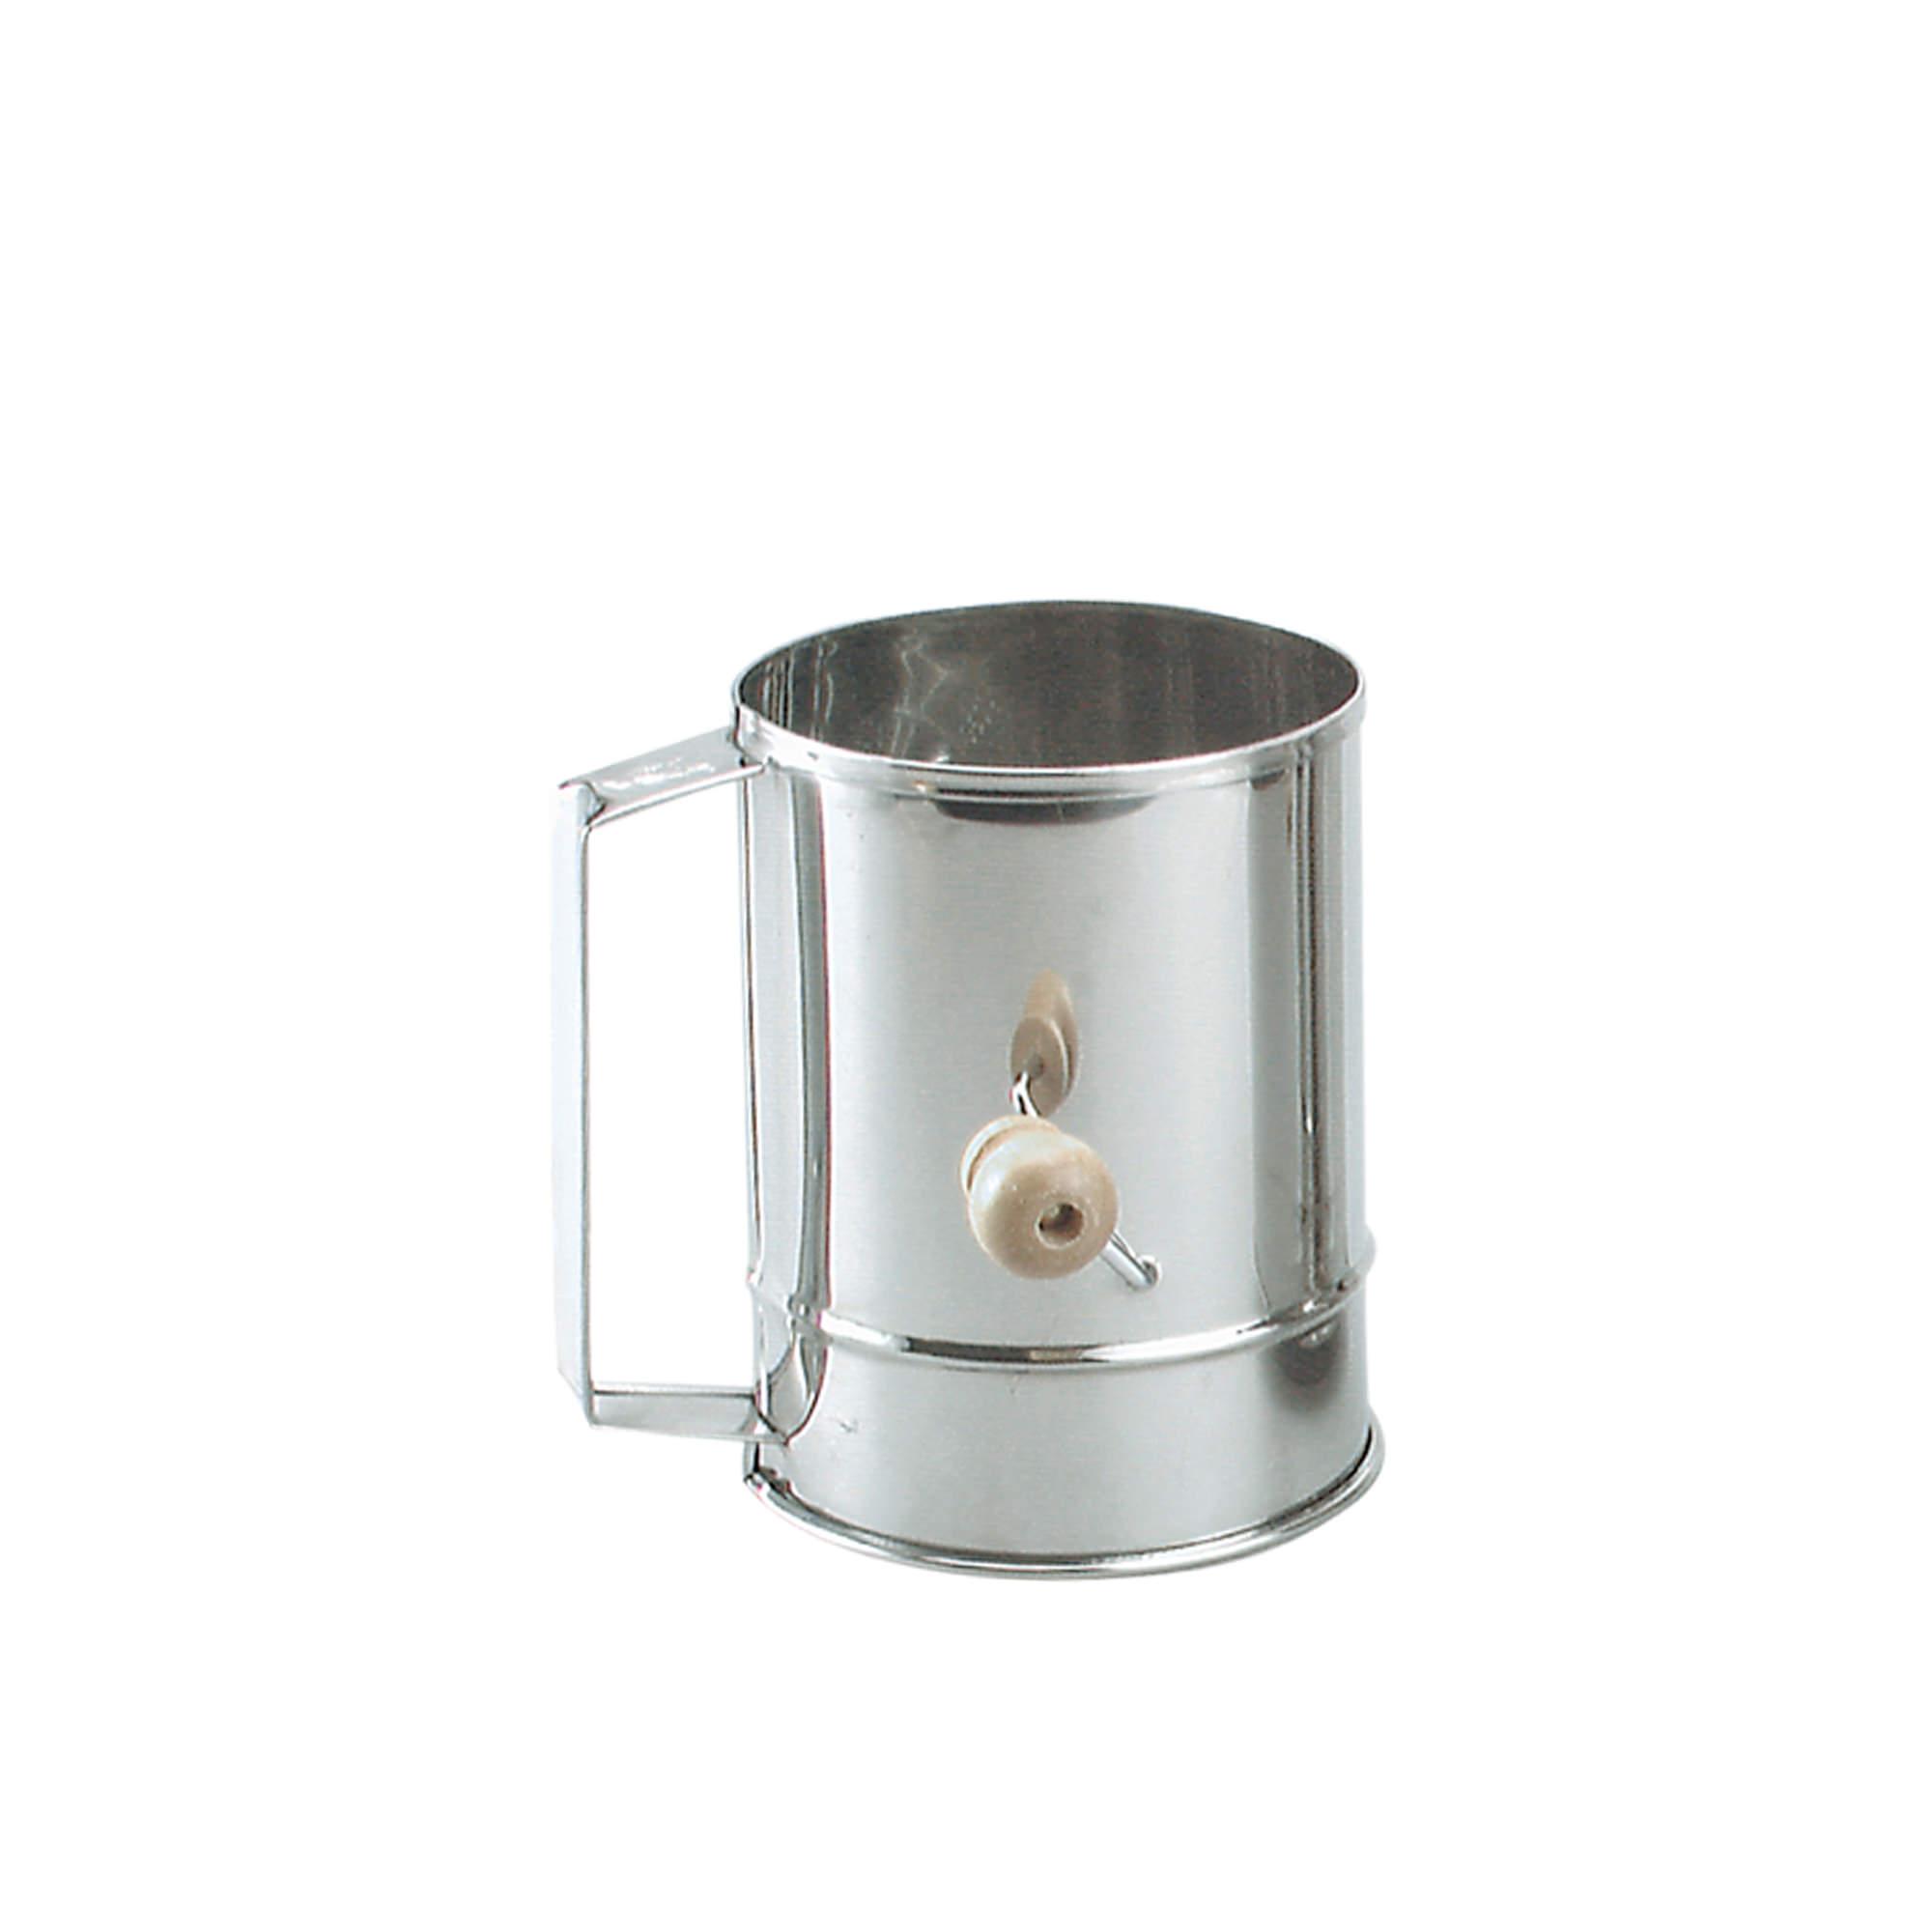 Chef Inox Stainless Steel Crank handle Flour Sifter 5 Cup Image 1